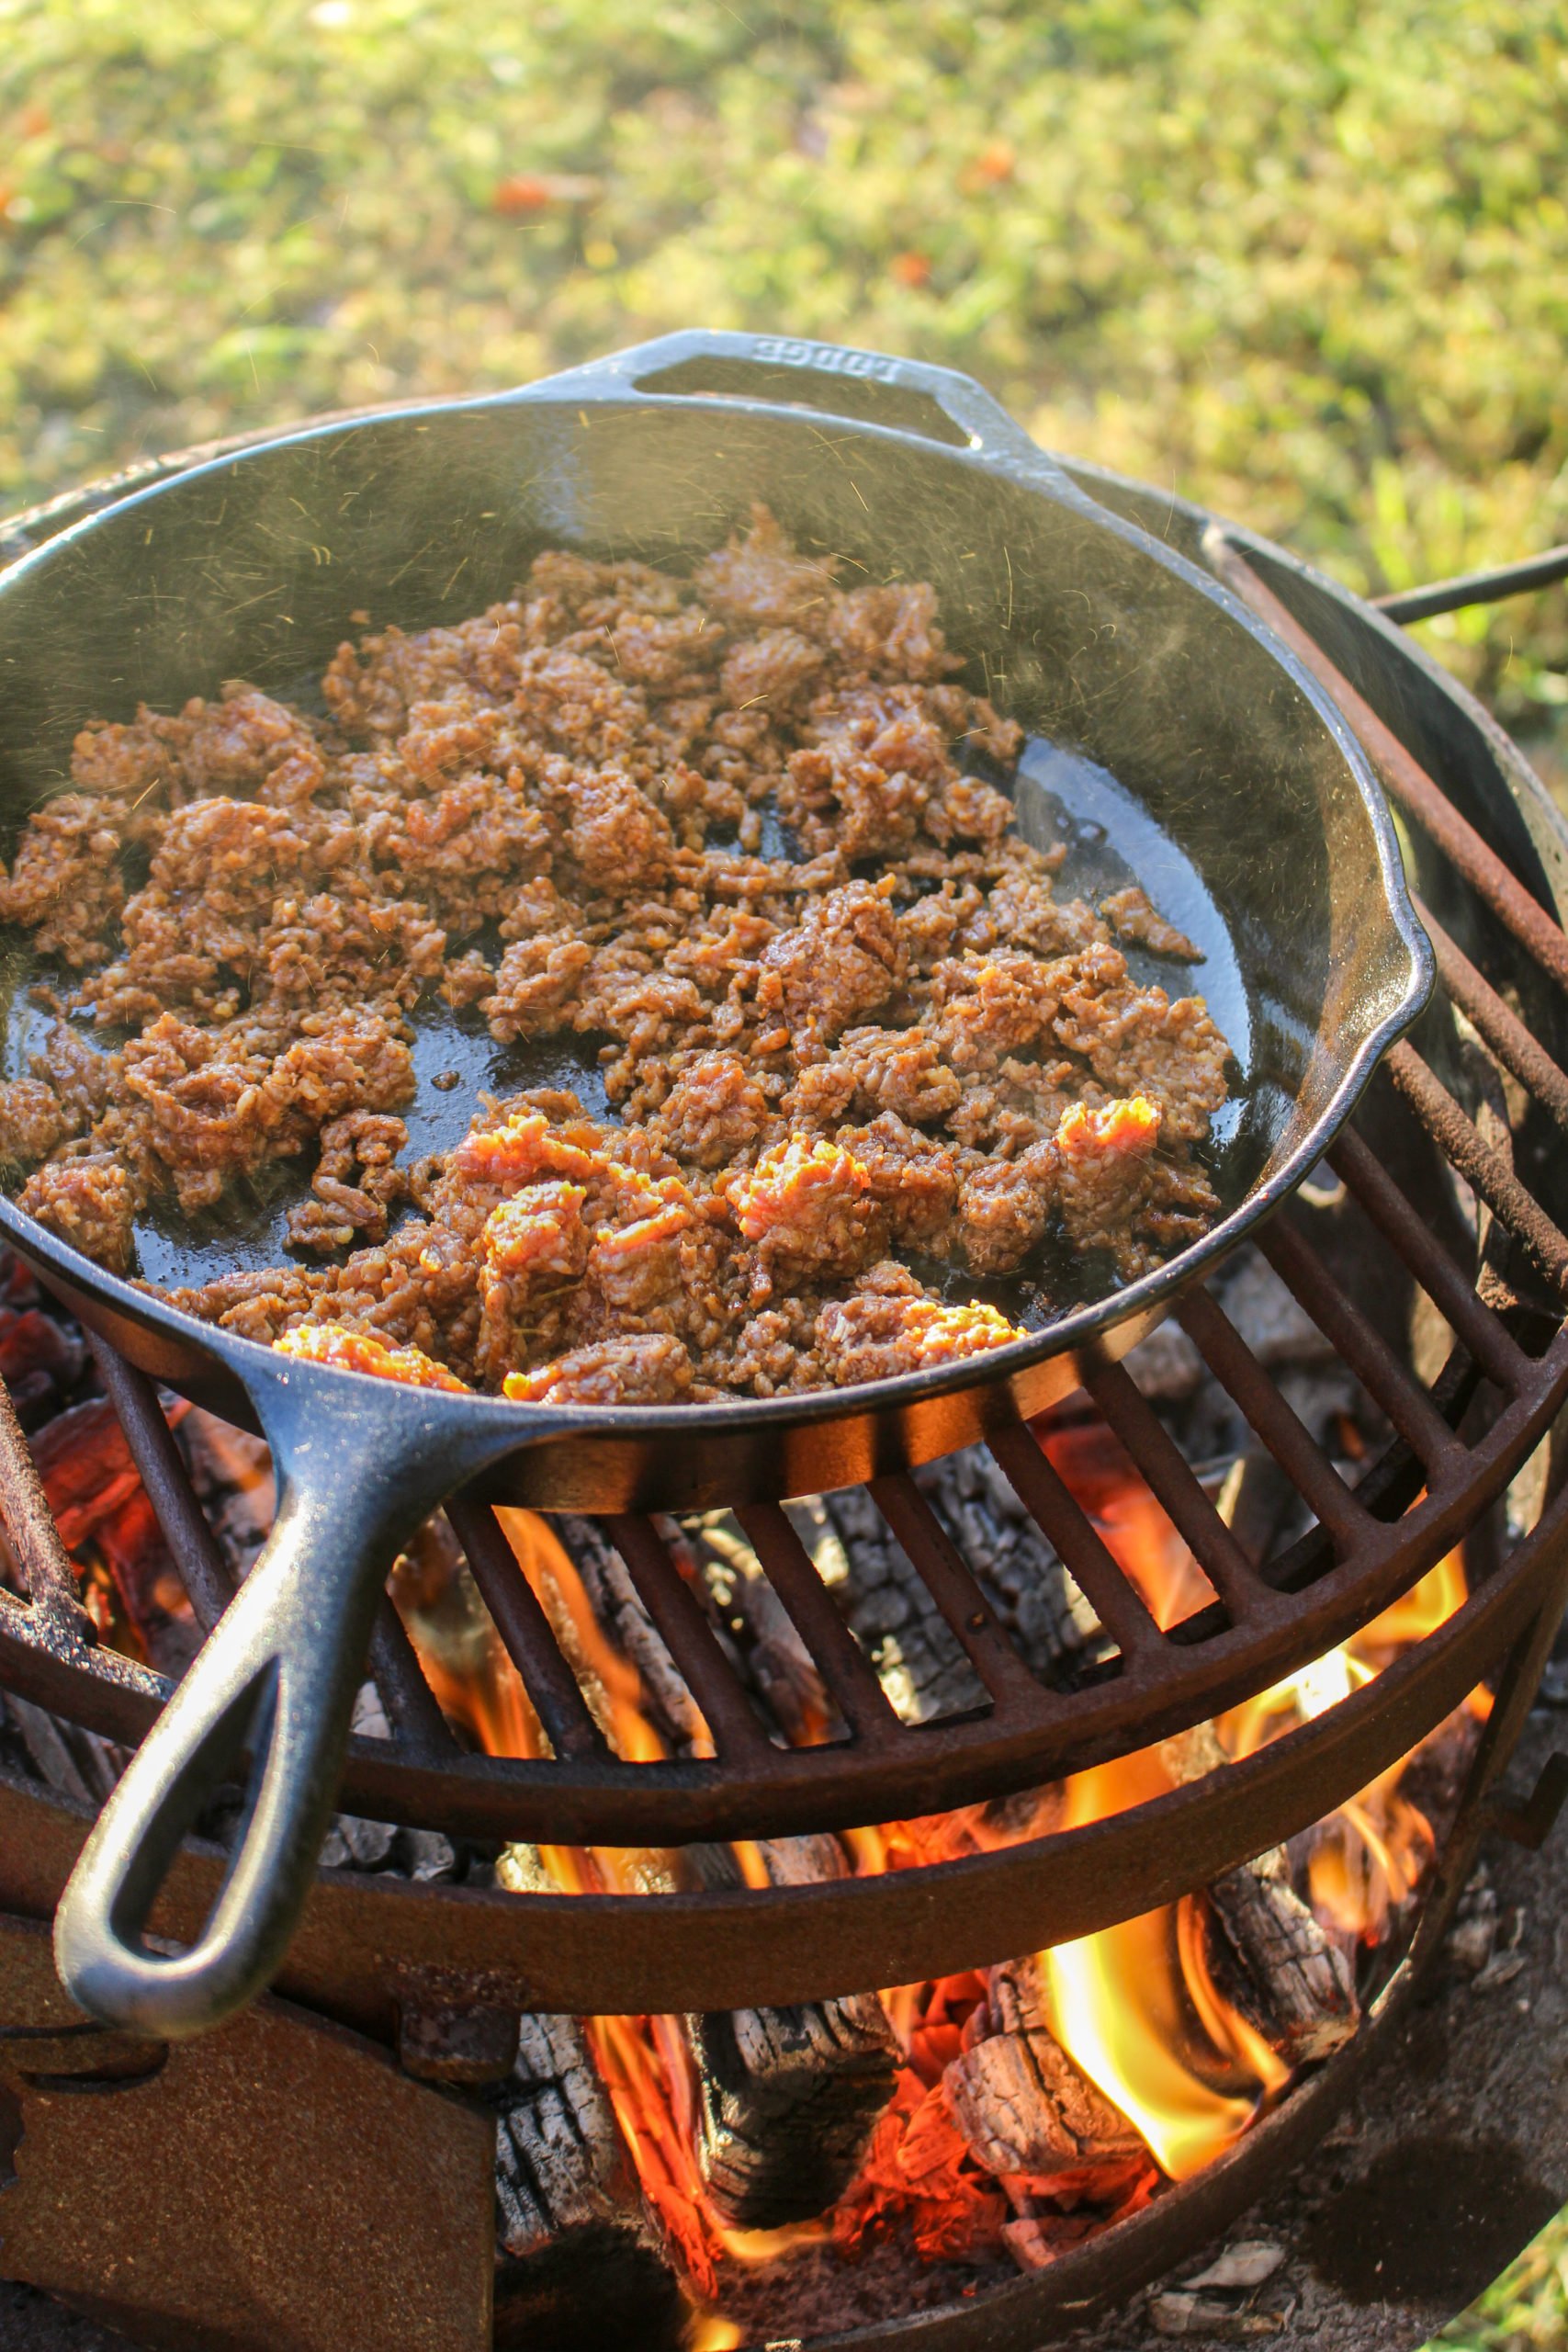 Skillet Choriqueso starts with the ground chorizo.